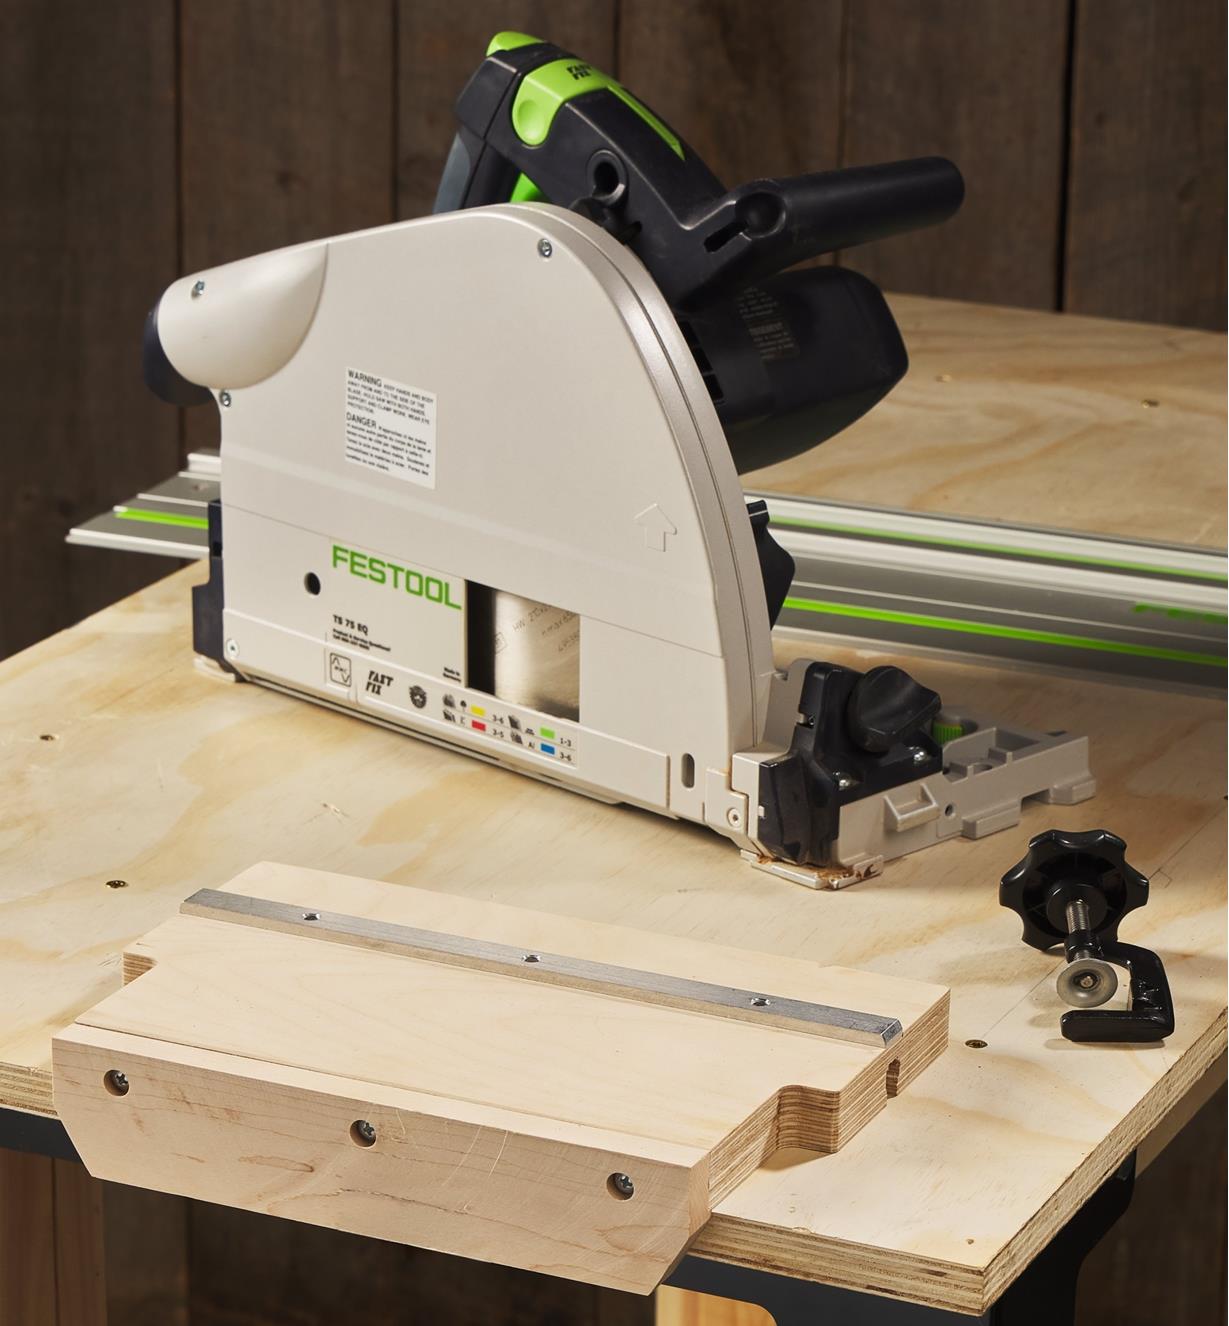 A track saw alignment jig set on a workbench next to a track saw and guide rail